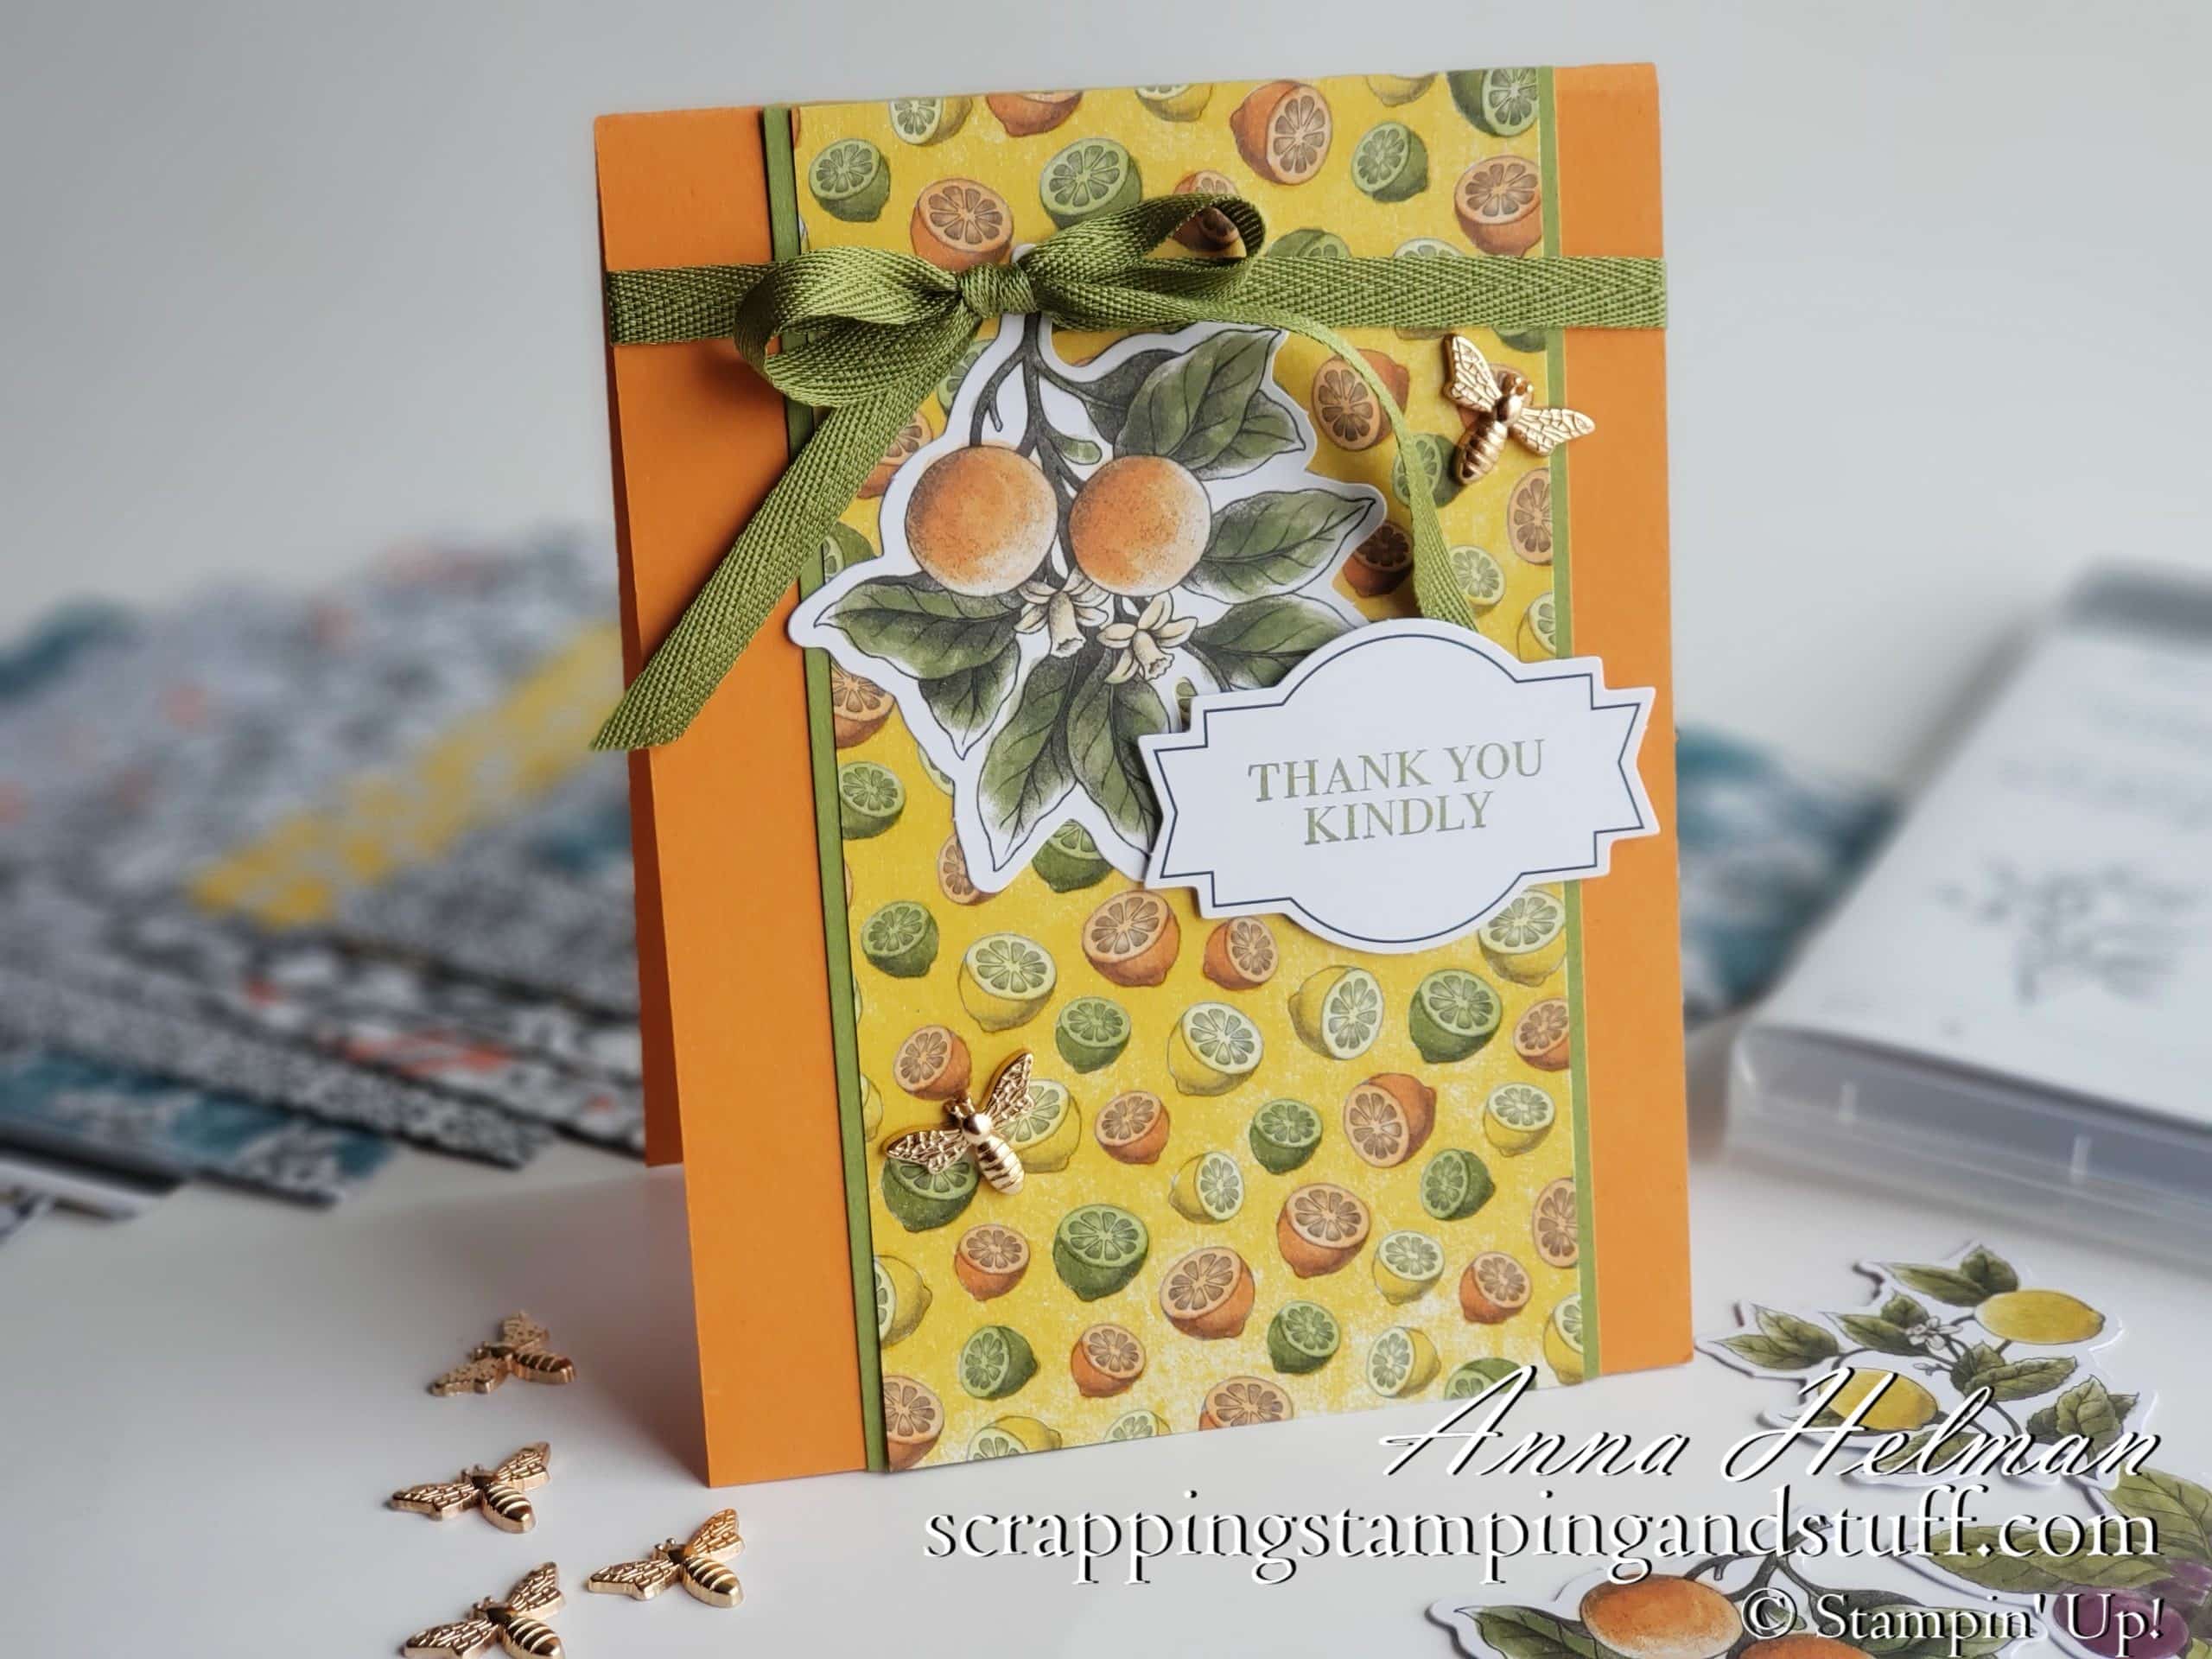 Cute orange card idea using the Stampin Up Botanical Prints product medley - oranges, lemons and limes on a pretty thank you card